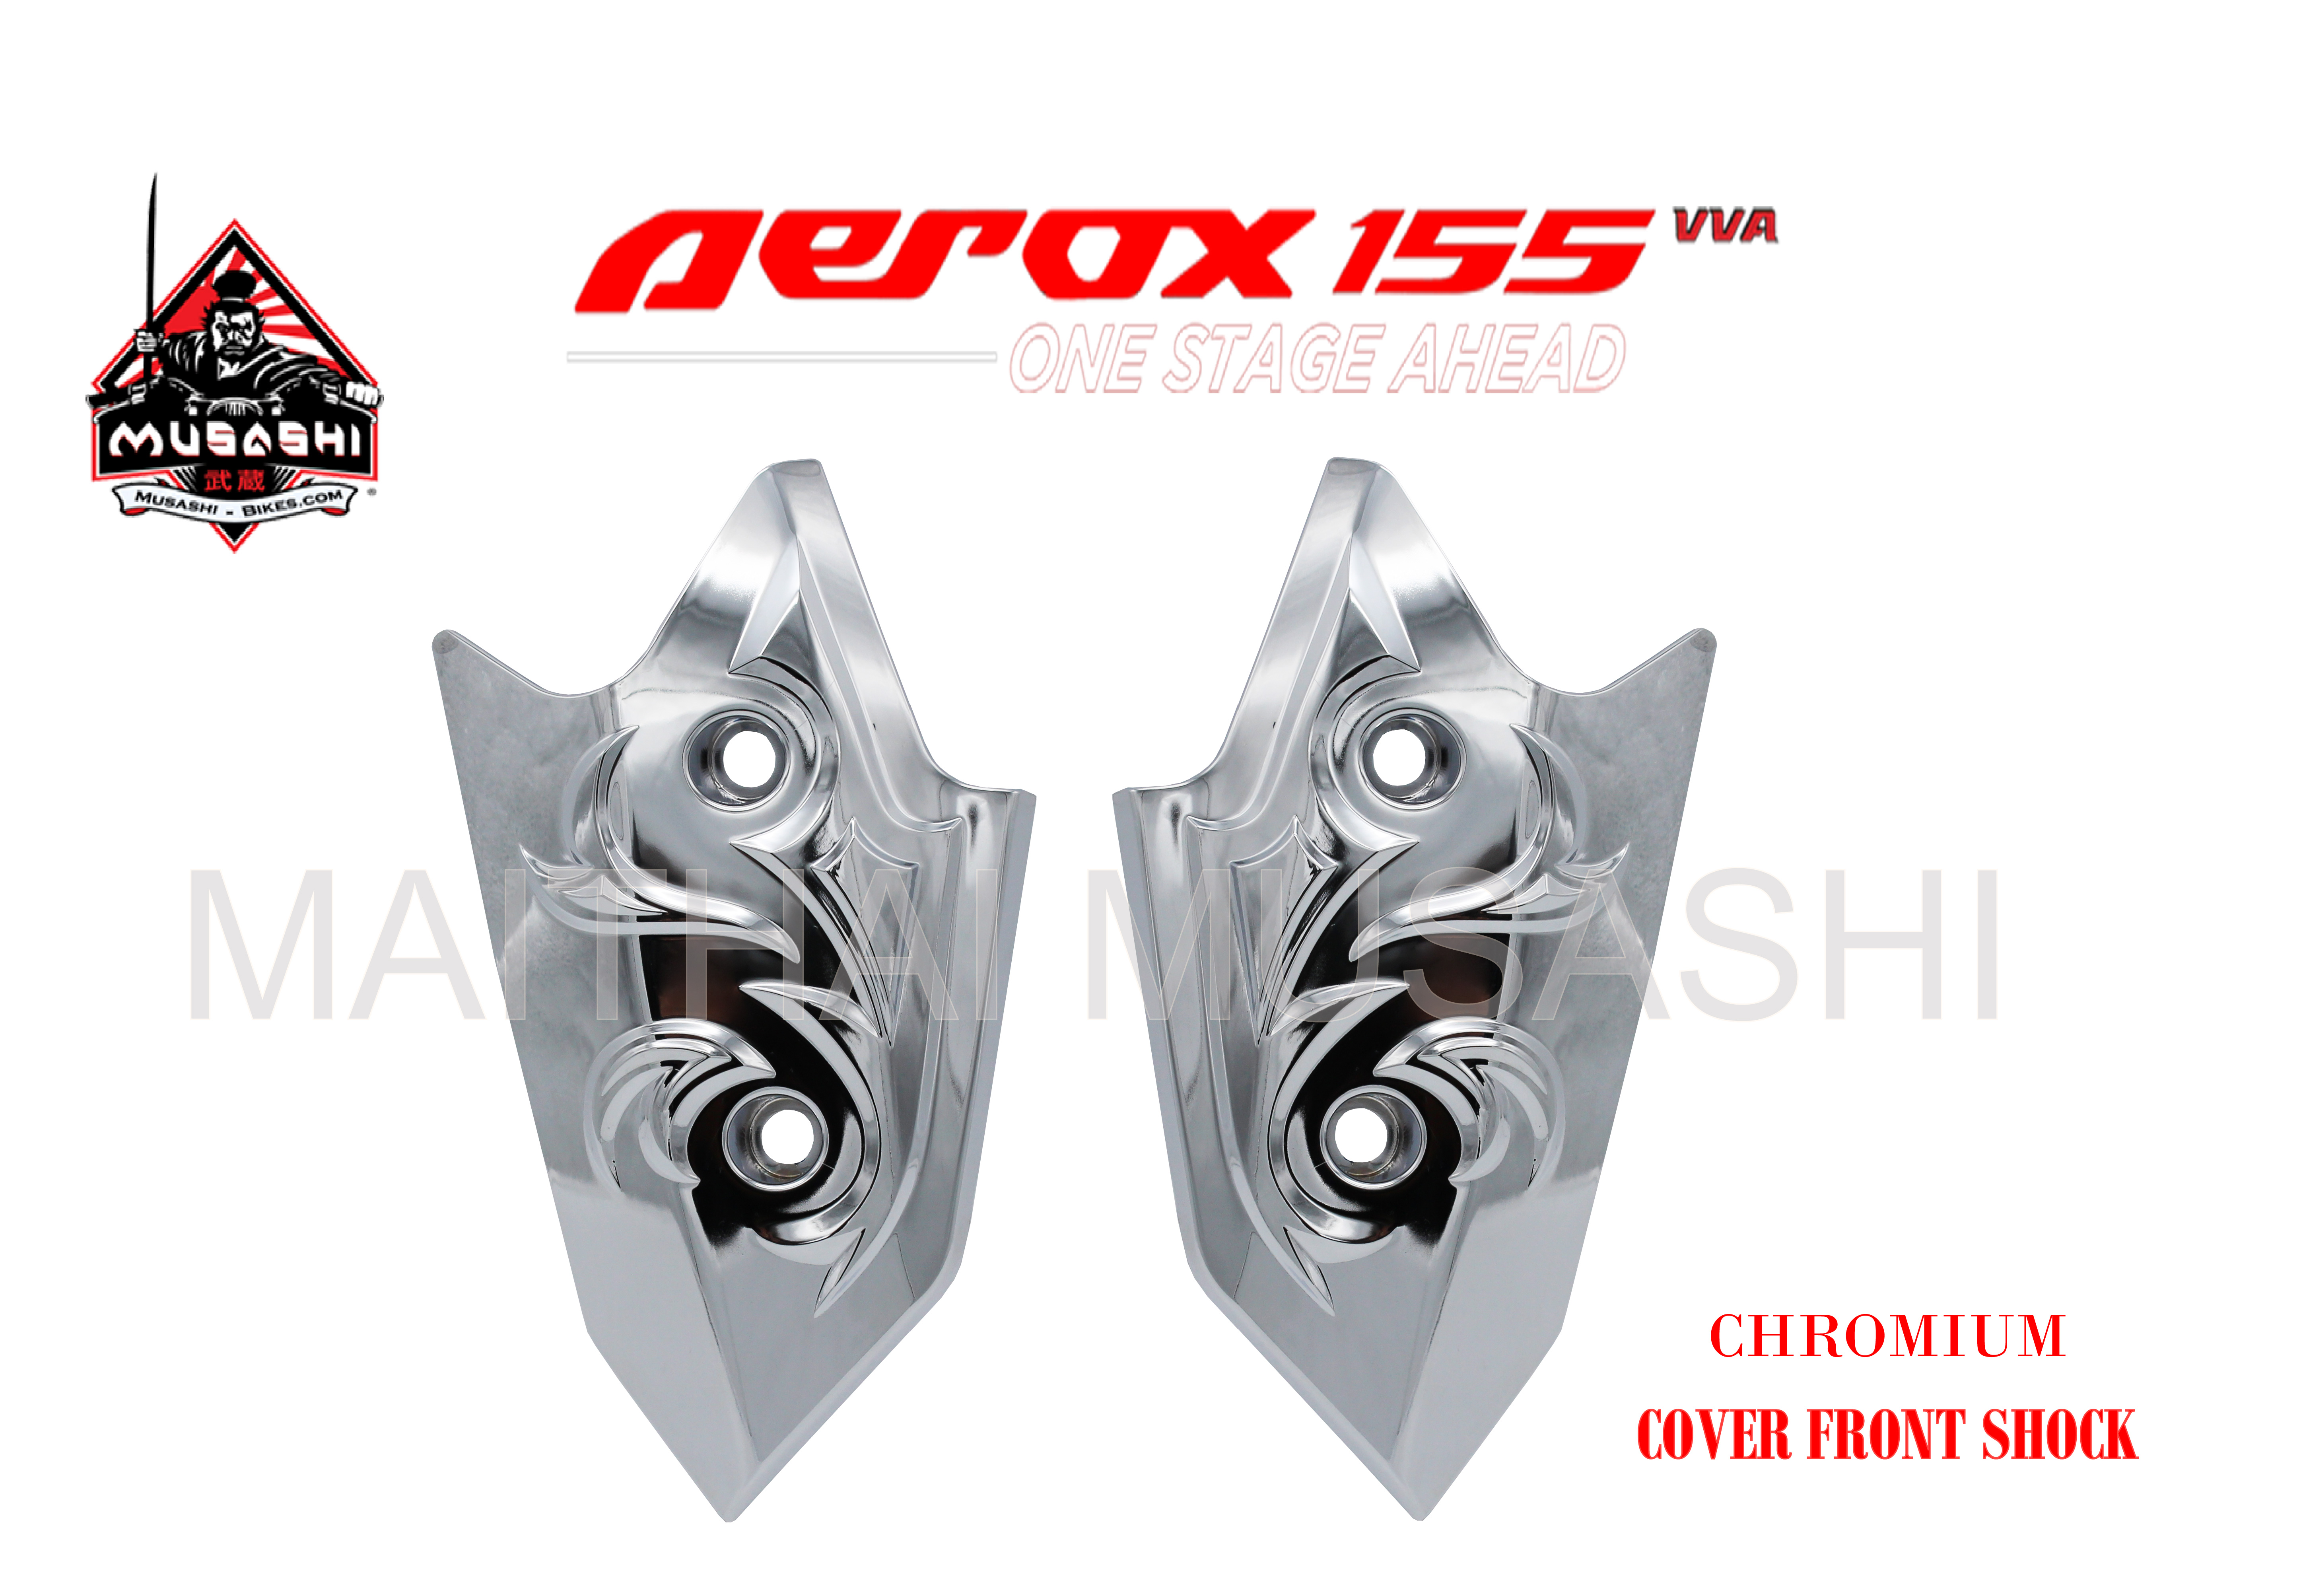 Front shock Cover - MM643